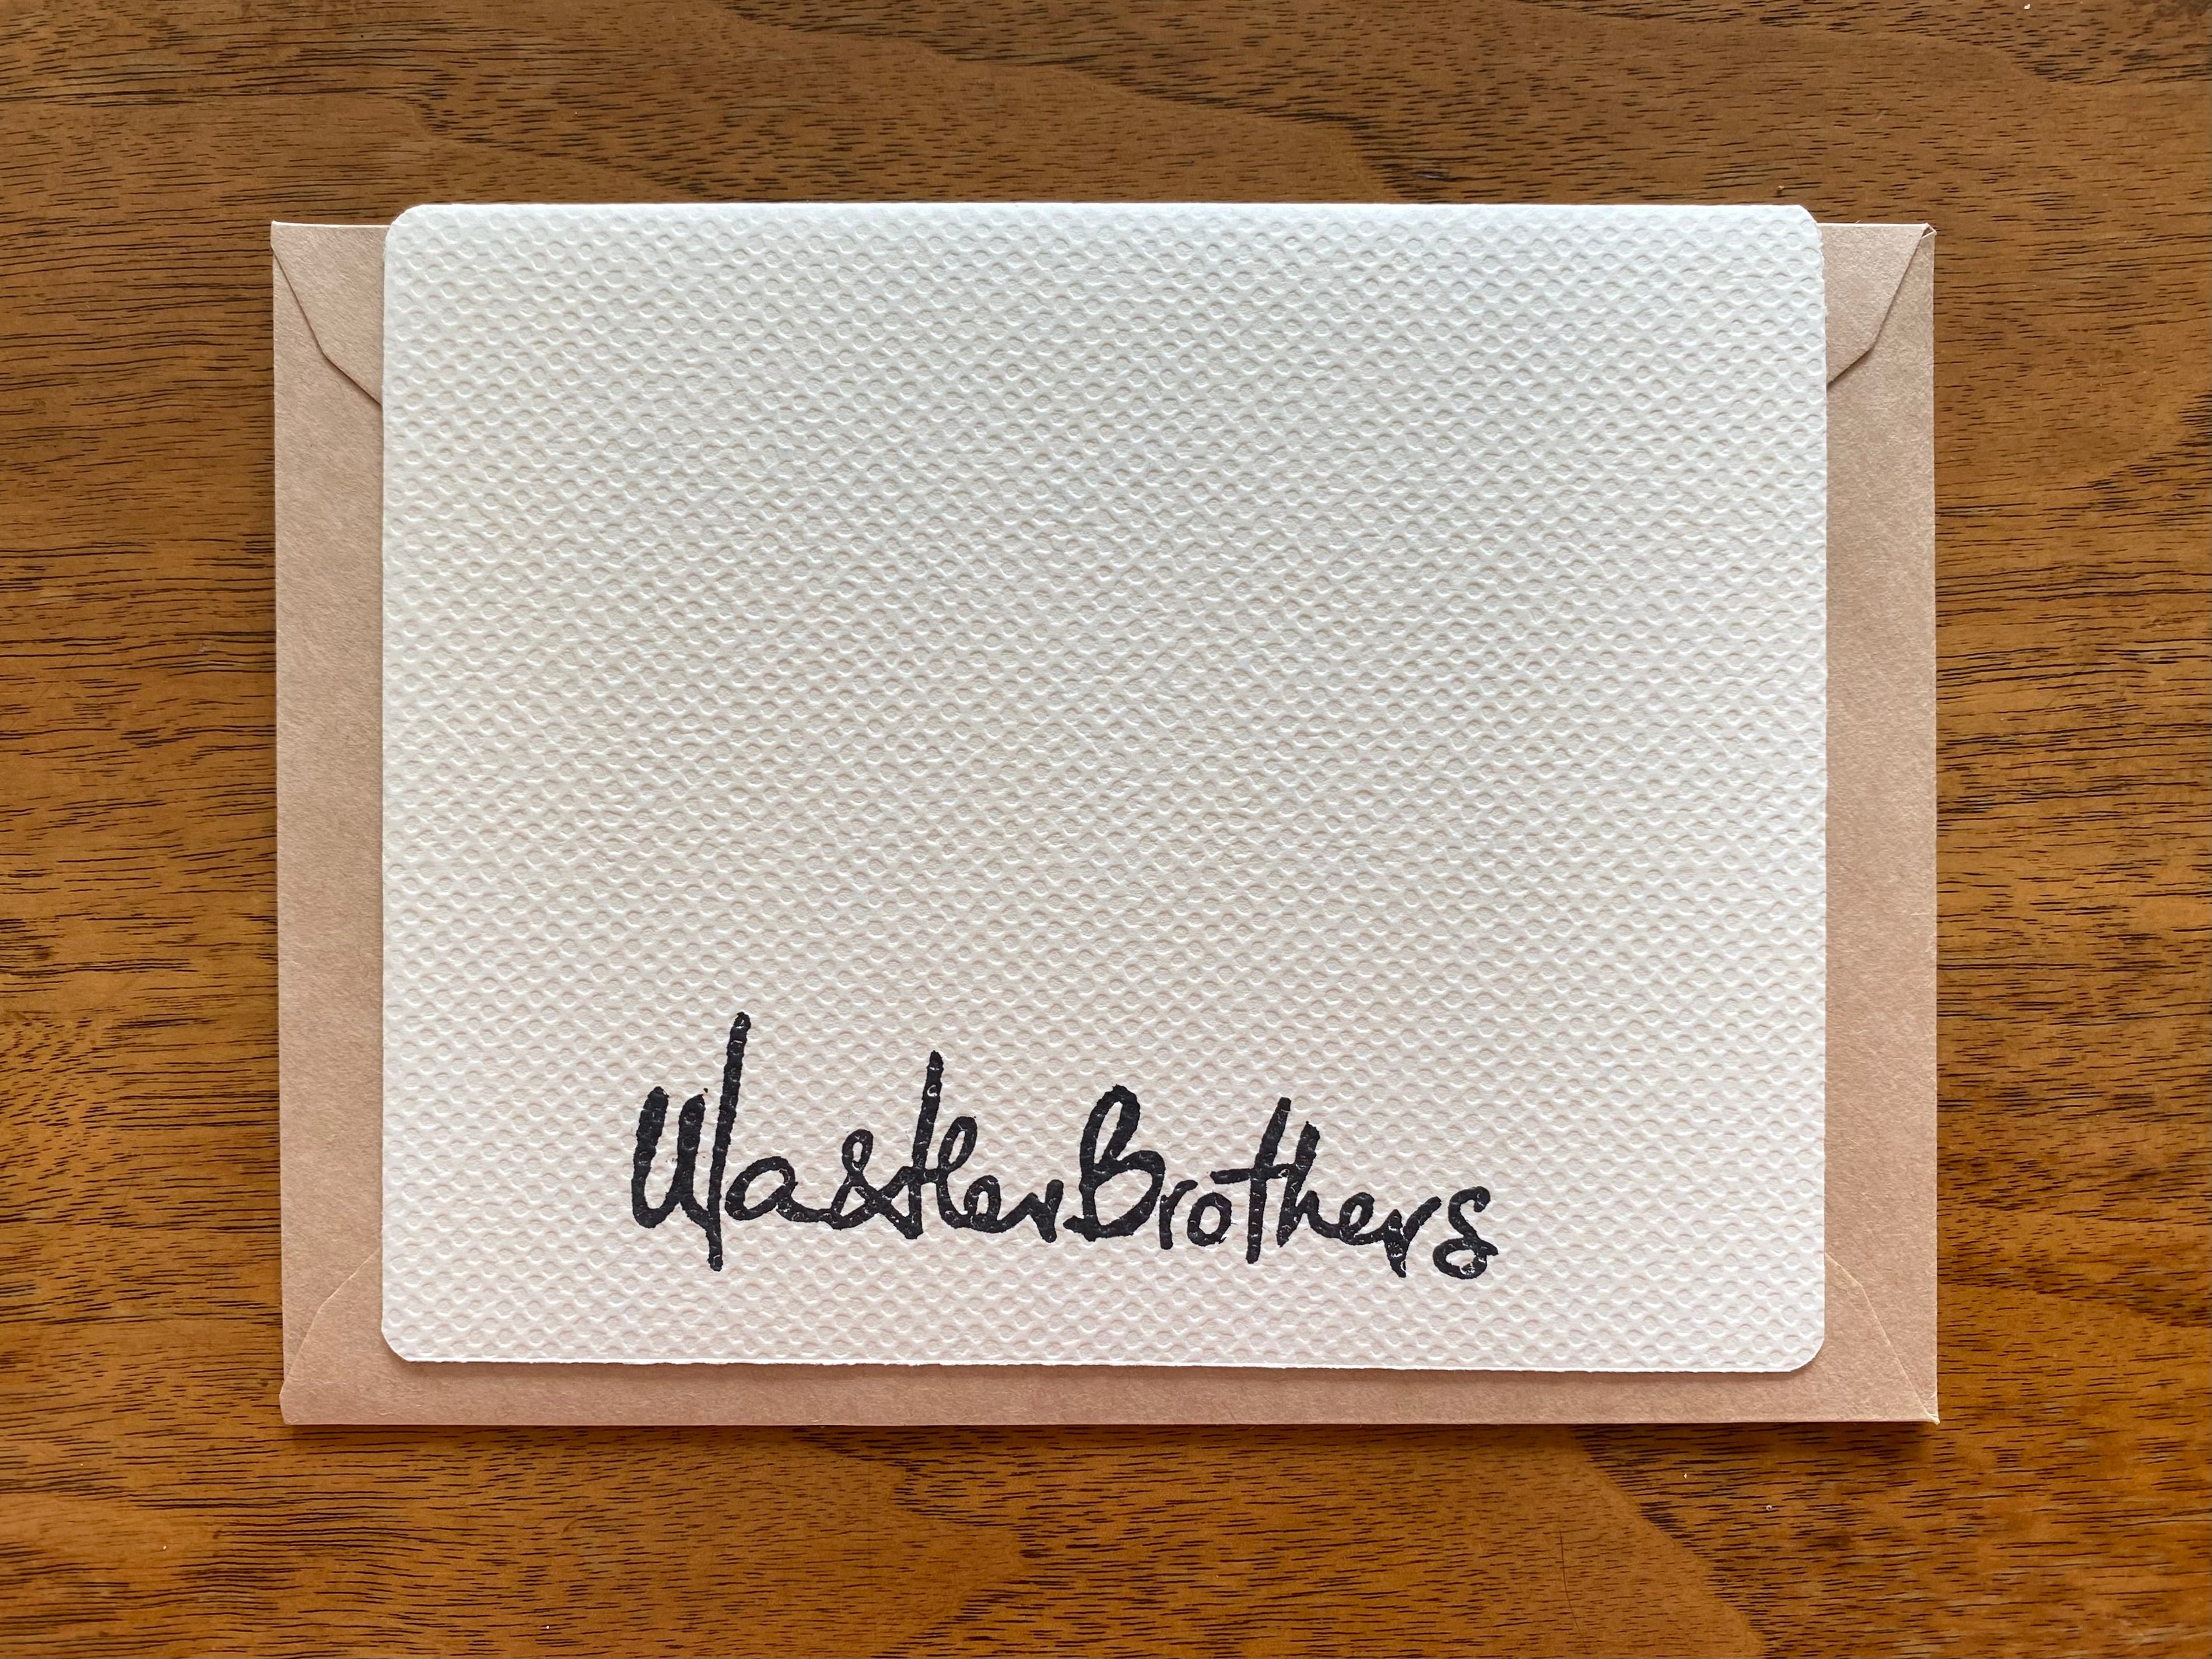 Kava Bowl Handmade & Handprinted Limited Edition Card by Ula&HerBrothers